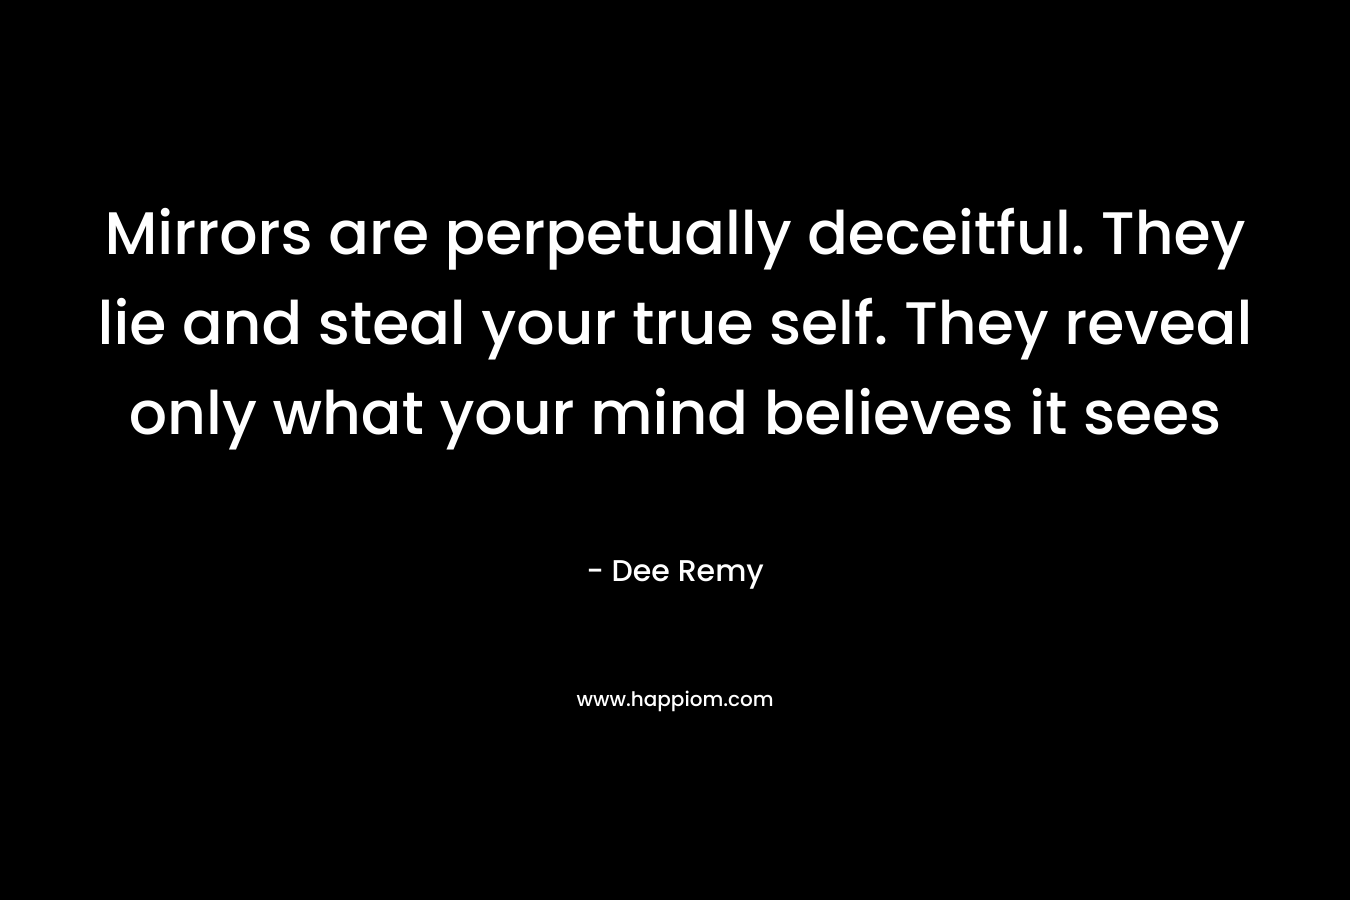 Mirrors are perpetually deceitful. They lie and steal your true self. They reveal only what your mind believes it sees – Dee Remy